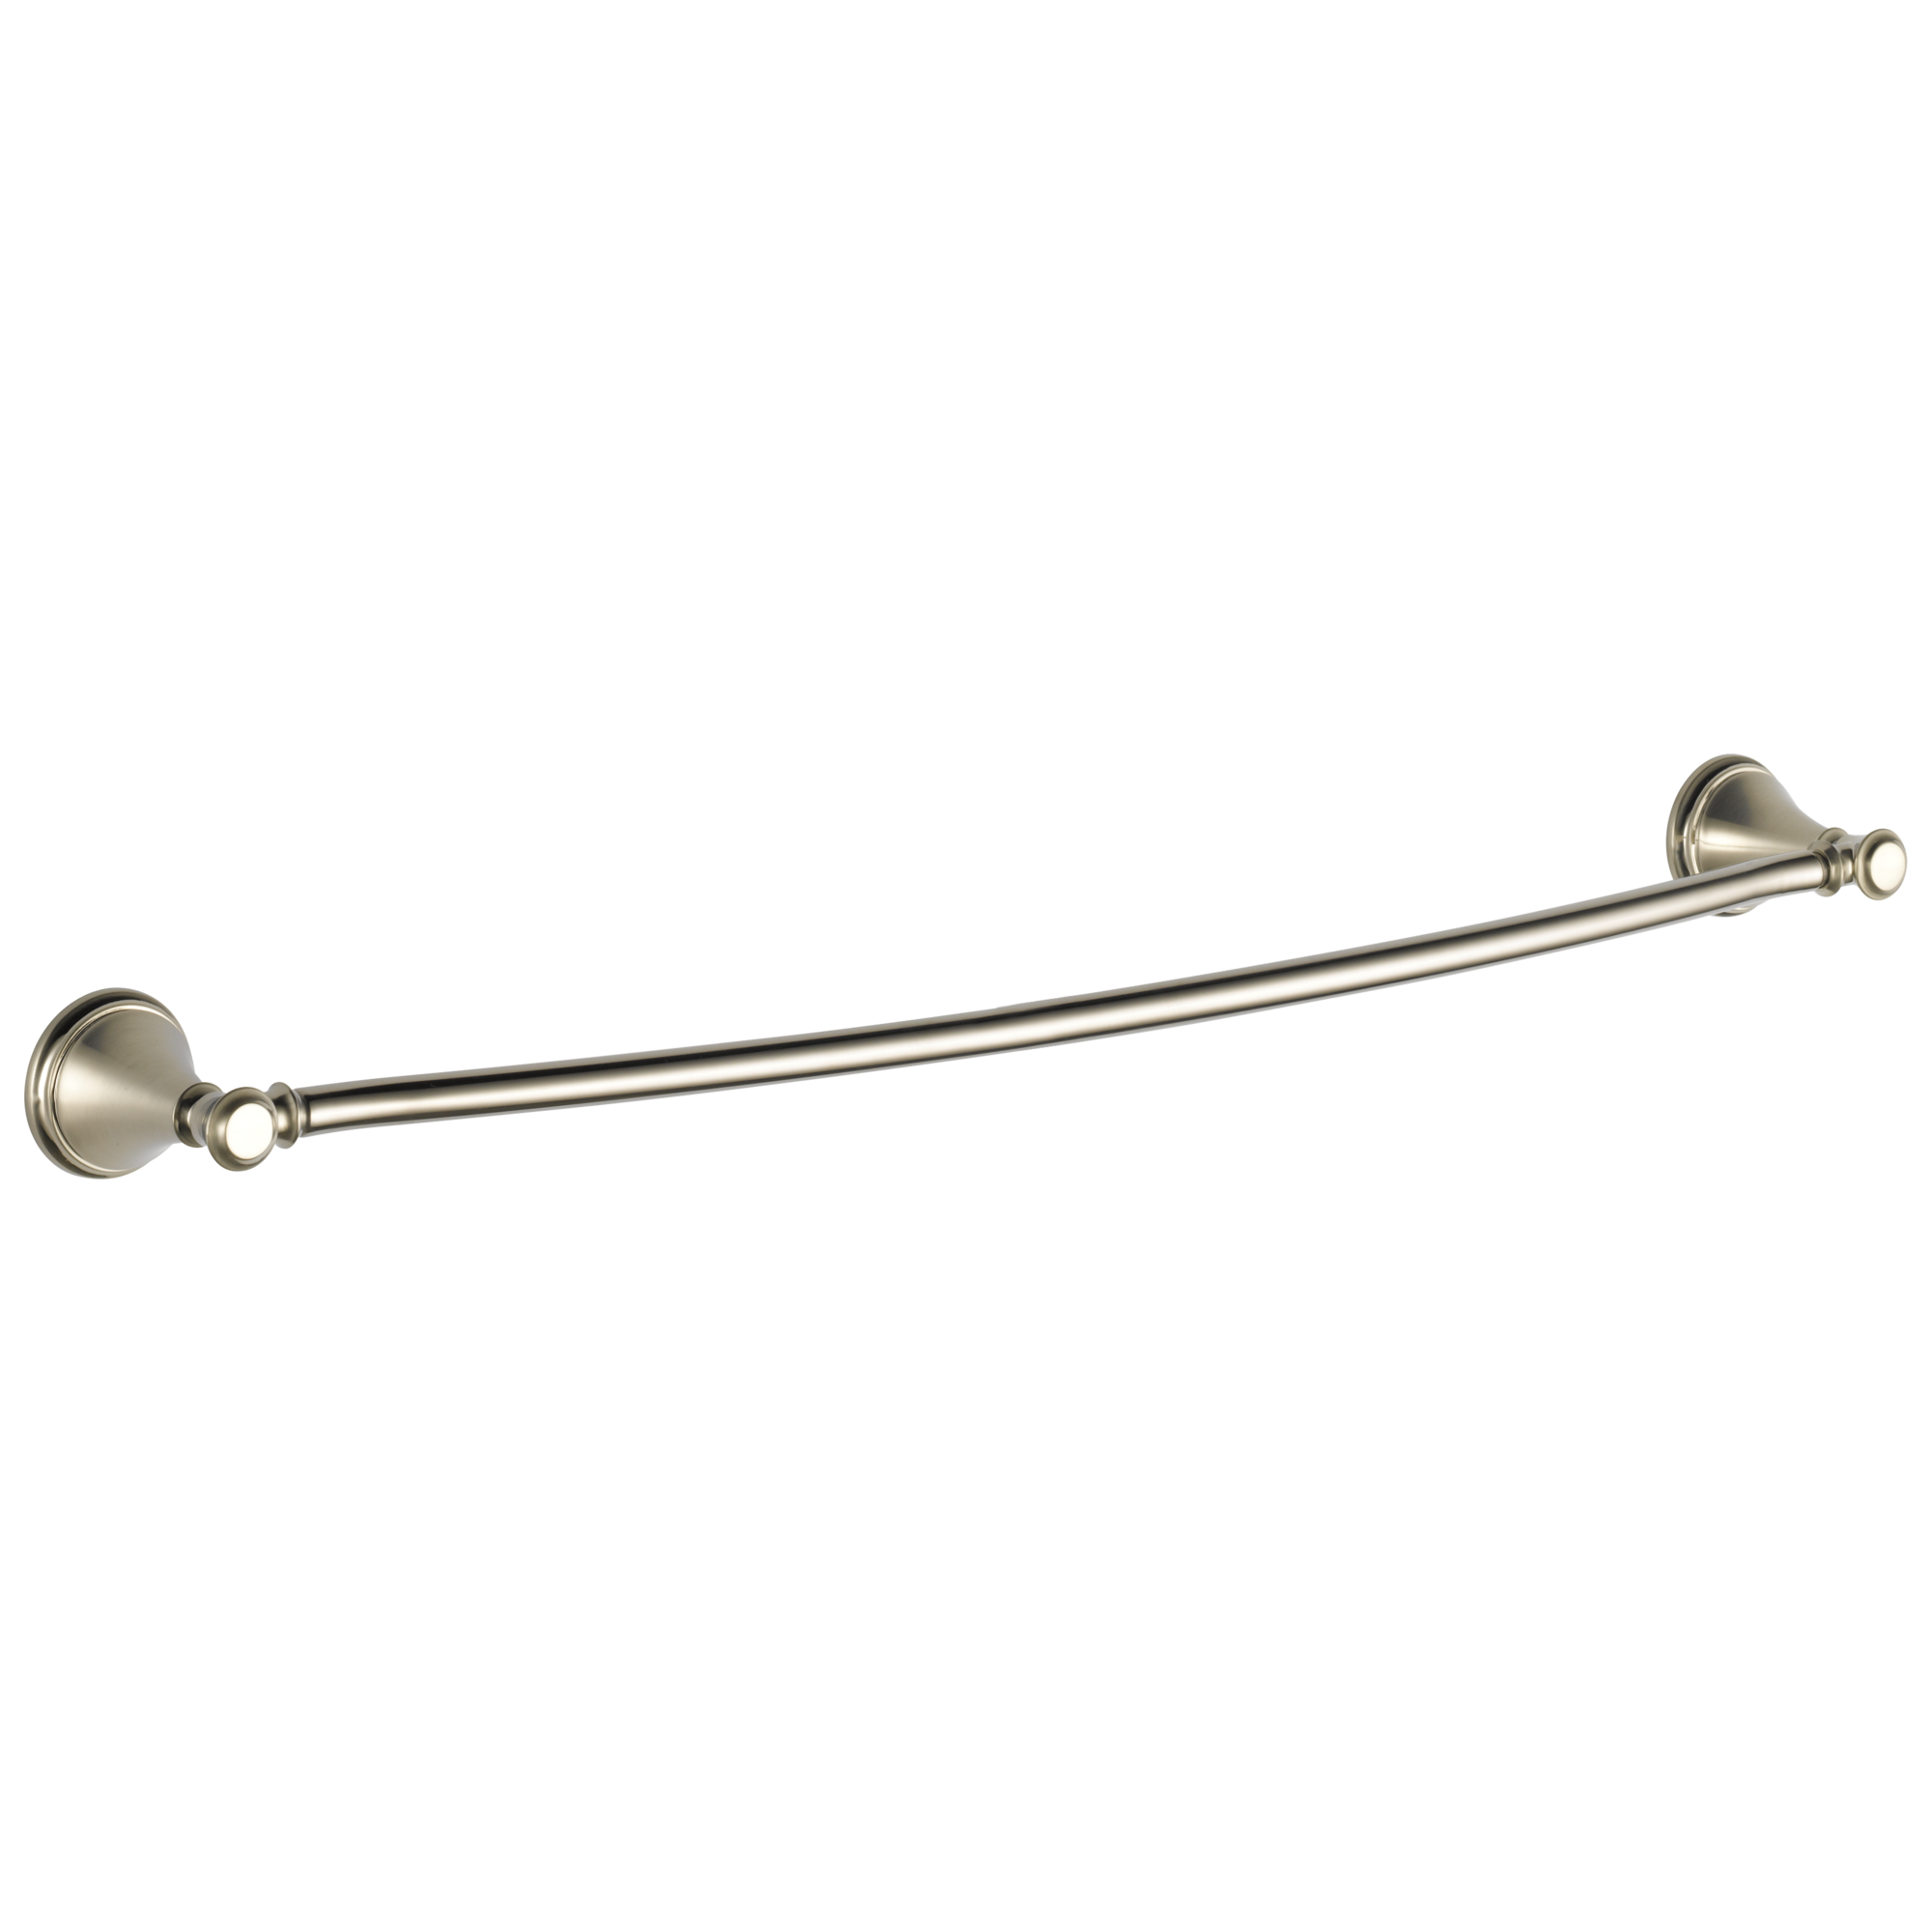 Towel Bar in Polished Nickel 79730-PN Delta Cassidy 30 in 